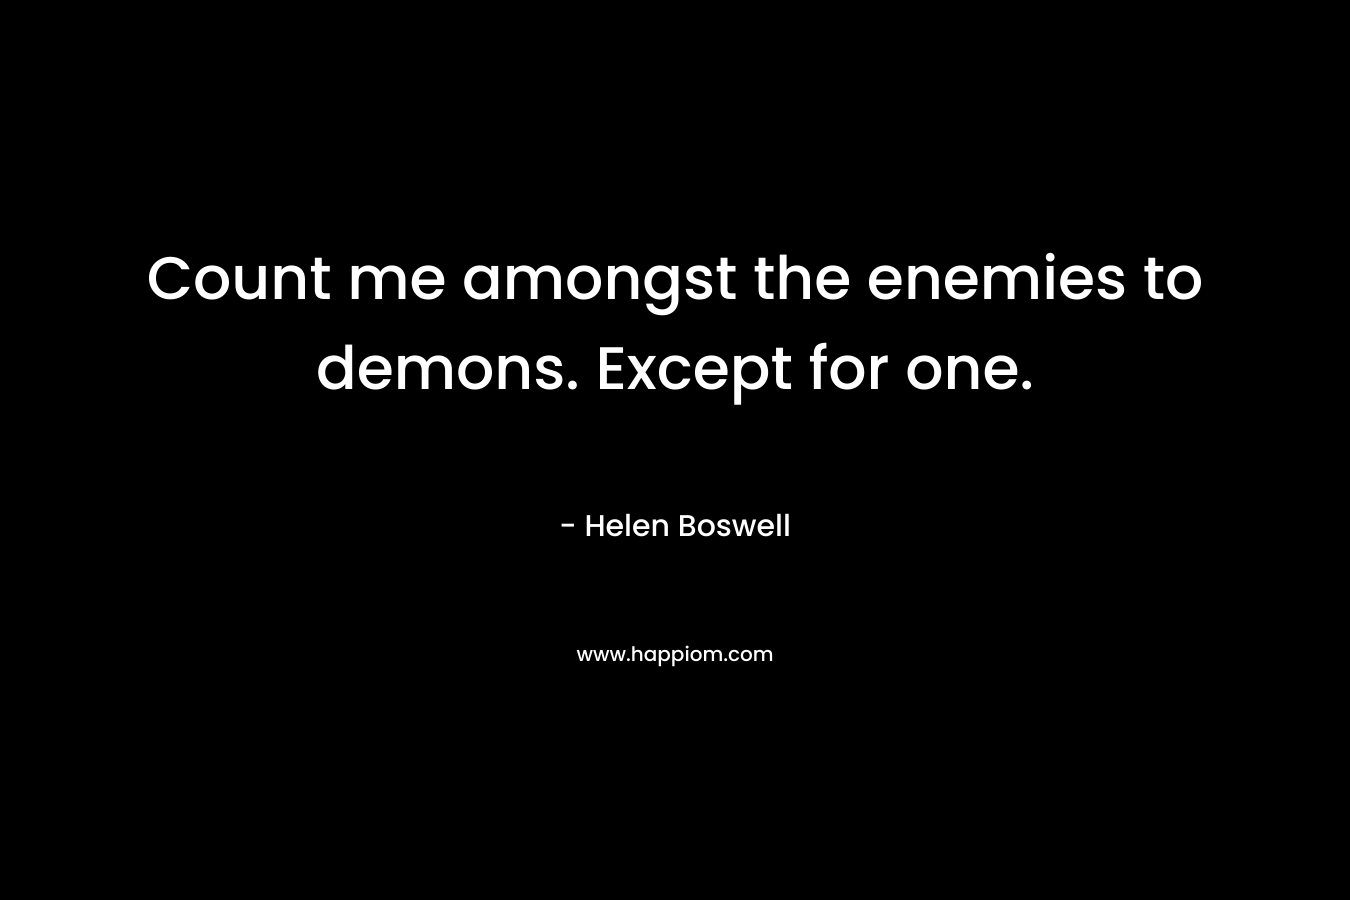 Count me amongst the enemies to demons. Except for one. – Helen Boswell